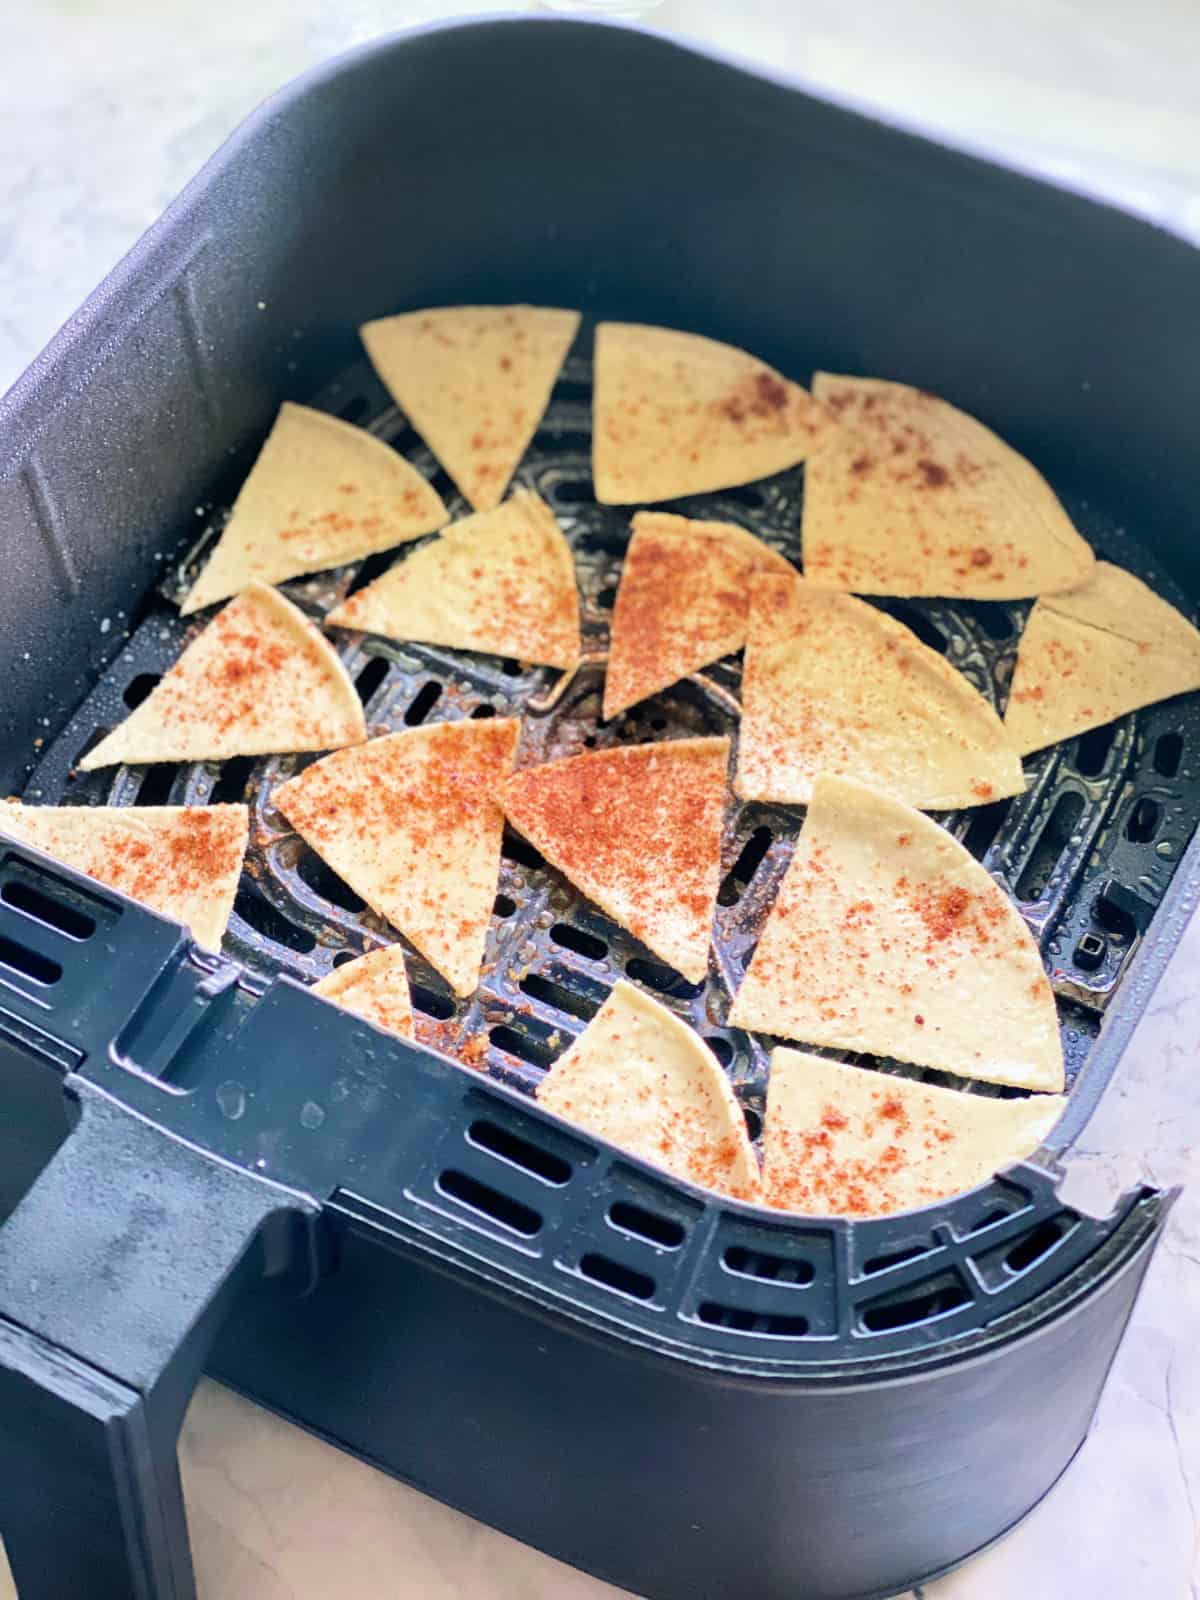 Black basket filled with corn tortilla chips with seasoning on top.